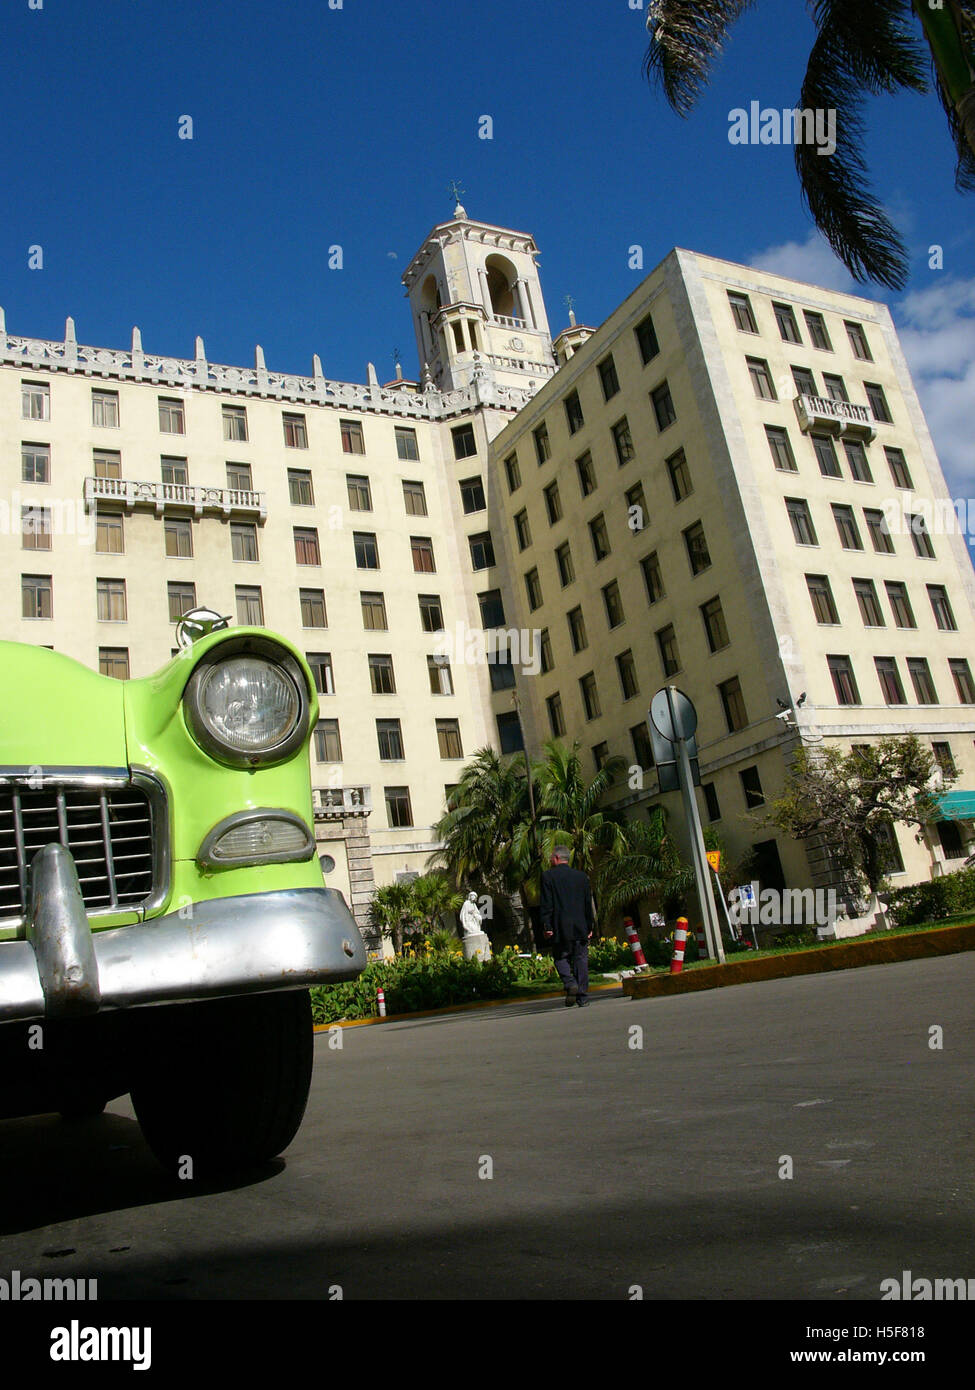 Mar 28, 2006 - Havana, CUBA - The Hotel Nacional de Cuba, Cuba's most prestigious and famous hotel. The Republic of Cuba is located in the northern Caribbean and south of the United States. The first European to visit Cuba was explorer Christopher Columbus in 1492. Centuries of colonial rule and revolutions followed. Batista was deposed by Fidel Castro and Che guevara in 1953. After the revolution trade with comminist Russia grew. The economy was hit hard in the 1990s following the collapse of the Soviet Union. Cuba currently trades with almost every nation in the world, albeit with restrictio Stock Photo